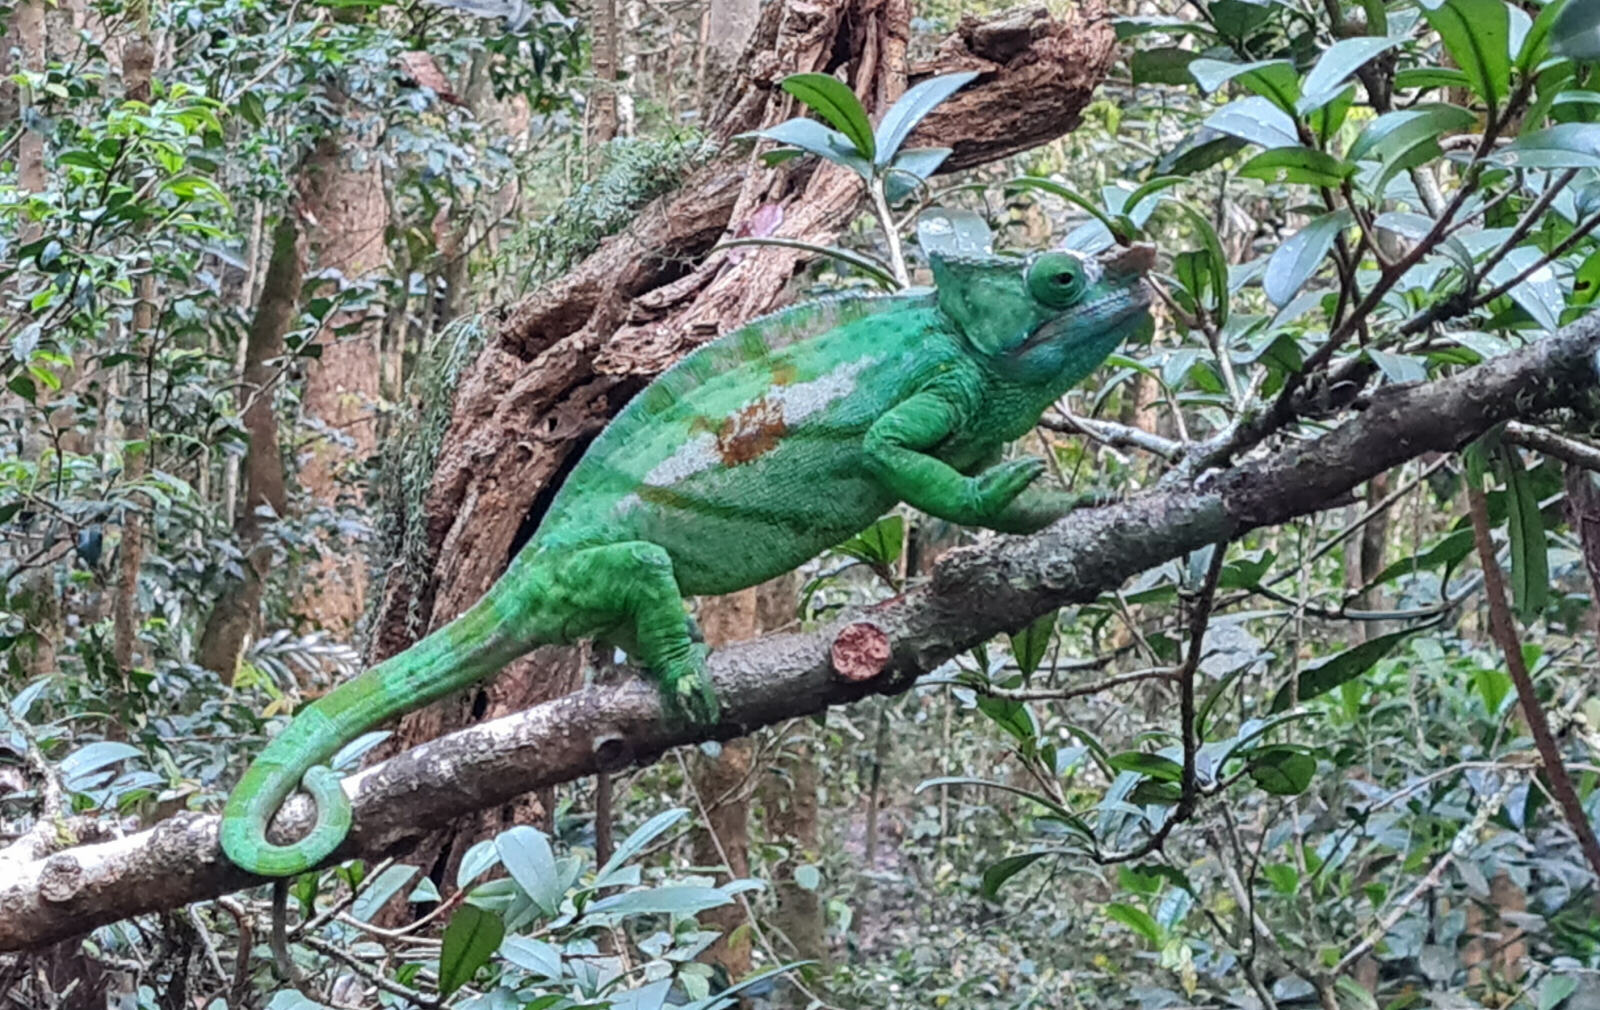 A Parson's chamelion in Andasibe reserve, Madagascar